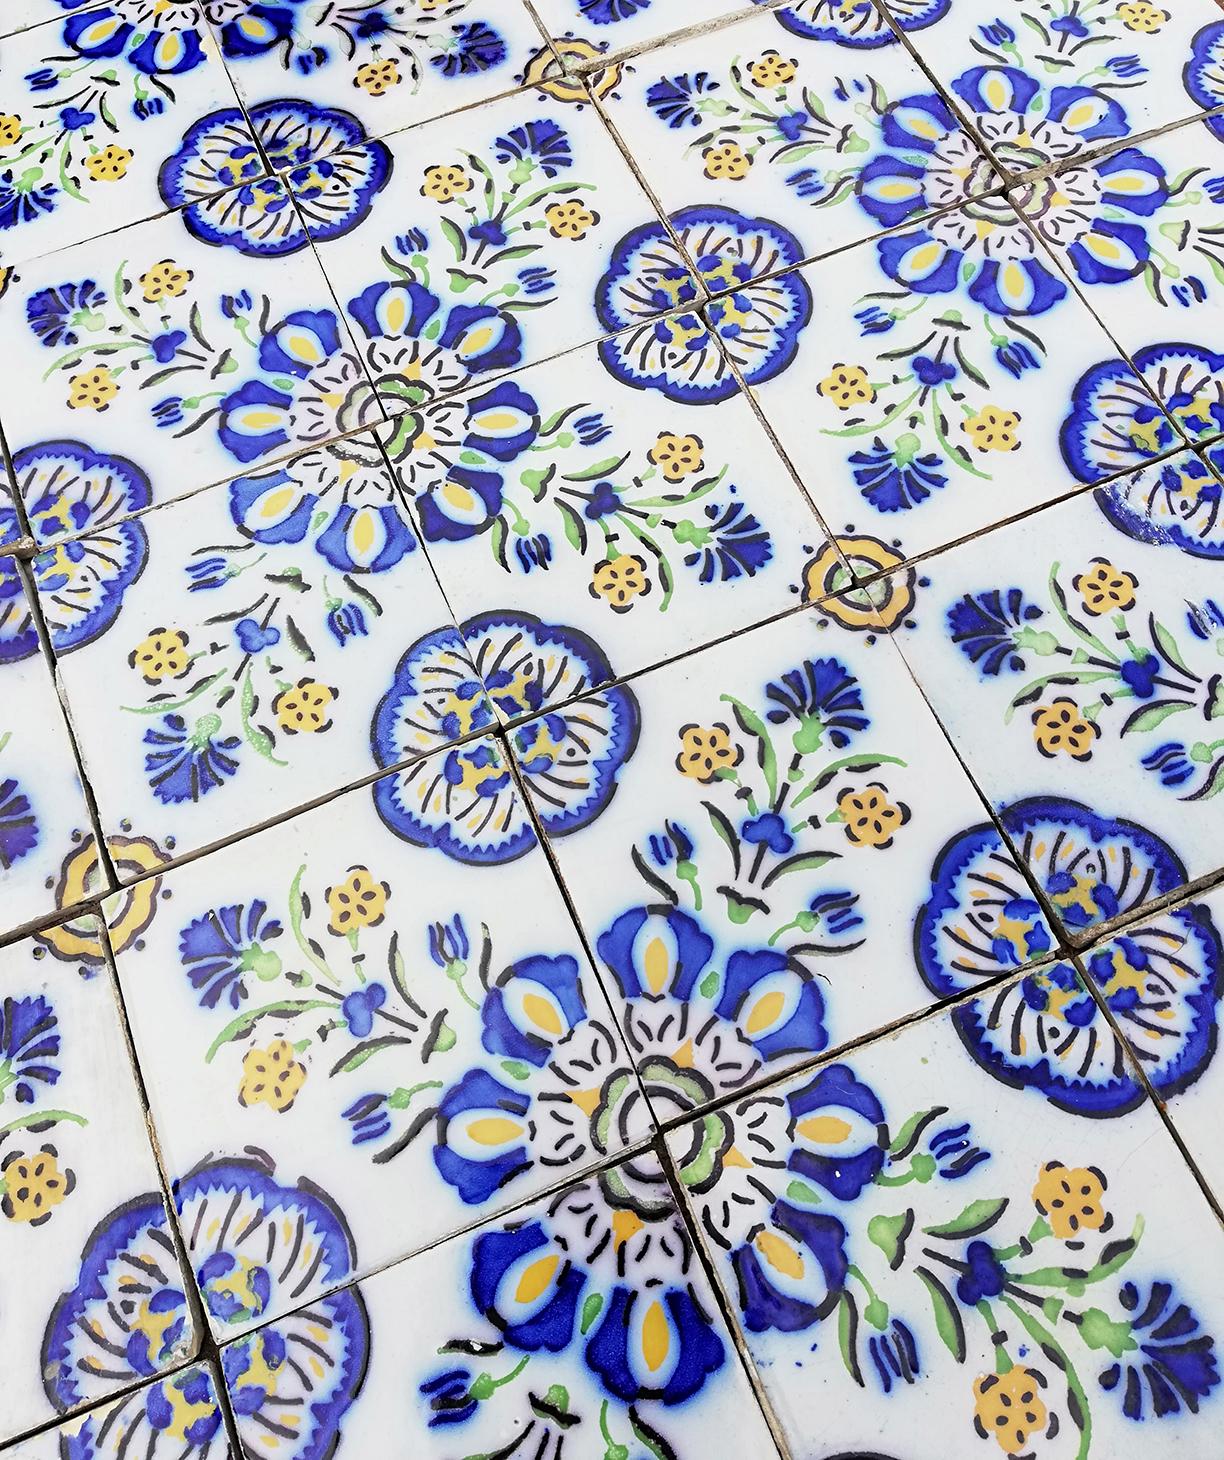 1 of the 410 Handmade Antique Ceramic Tiles by Devres, France, 1910s 2